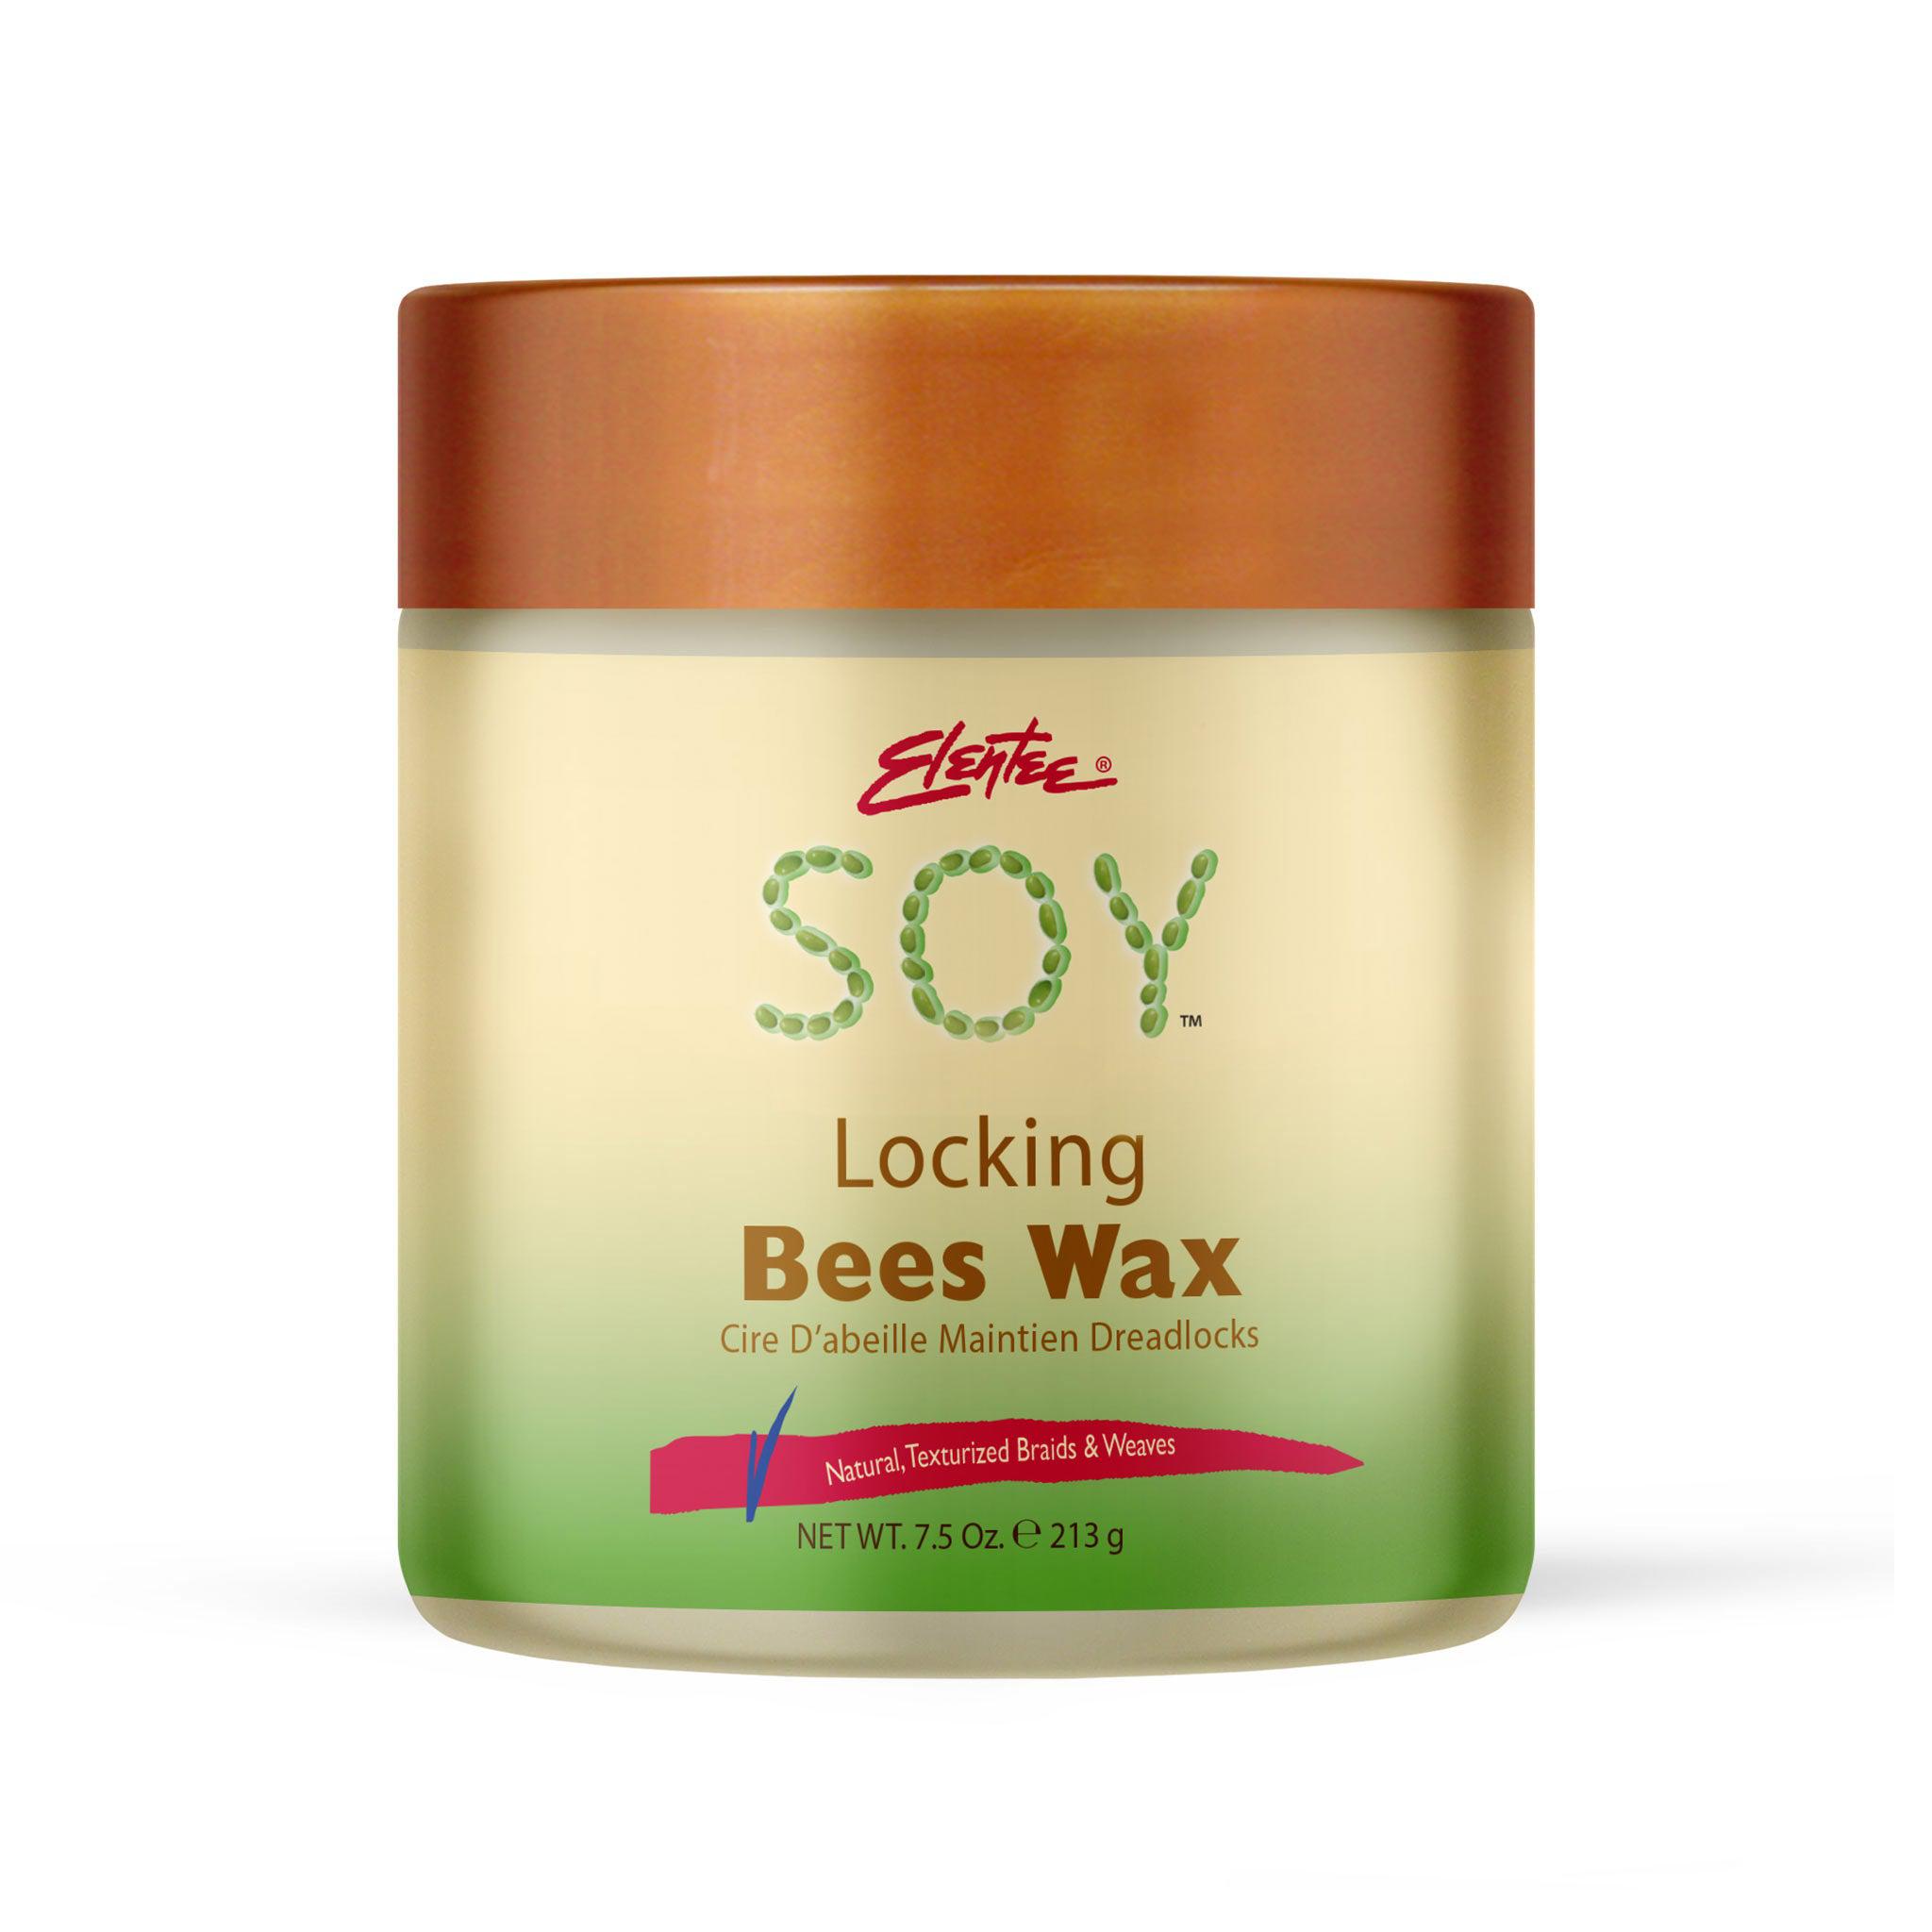 Elentee Soy Bees Wax Front